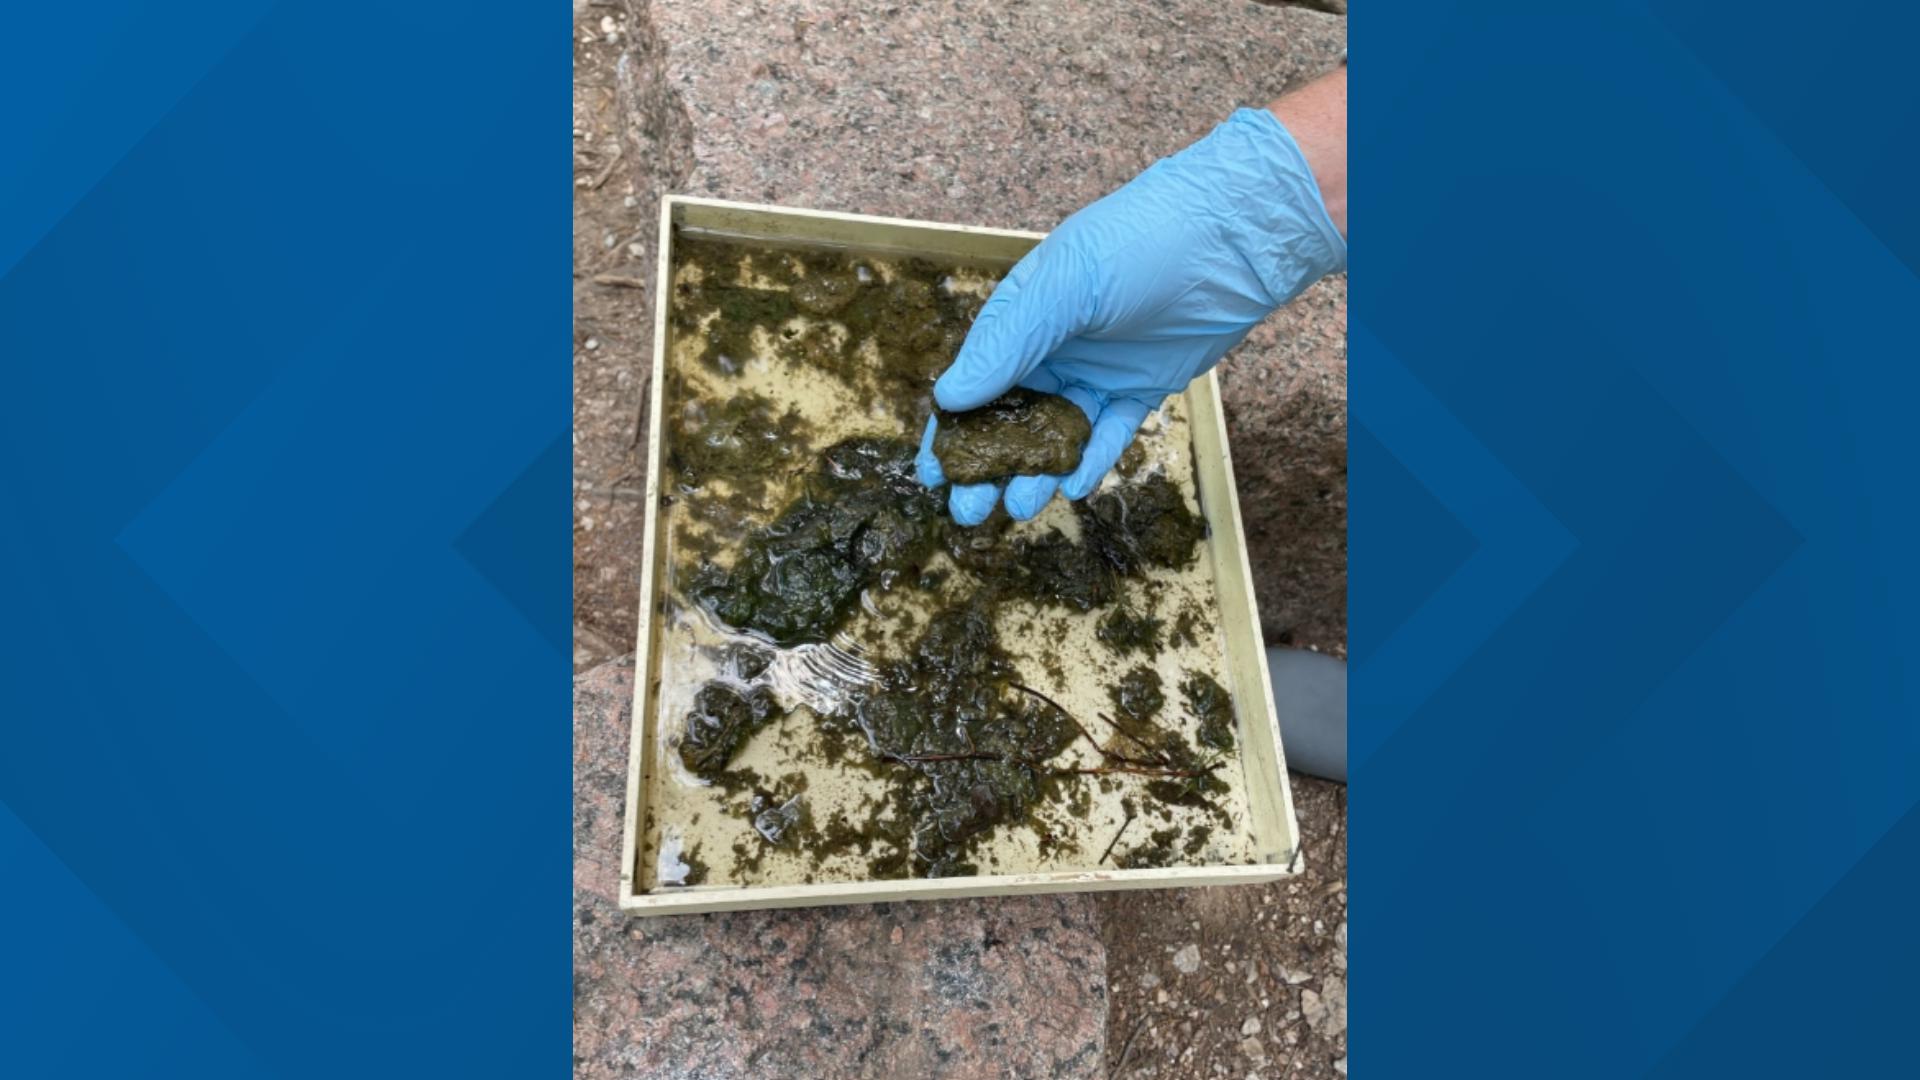 Officials with Austin Watershed Protection have detected a large amount of toxic blue algae in Lady Bird Lake.